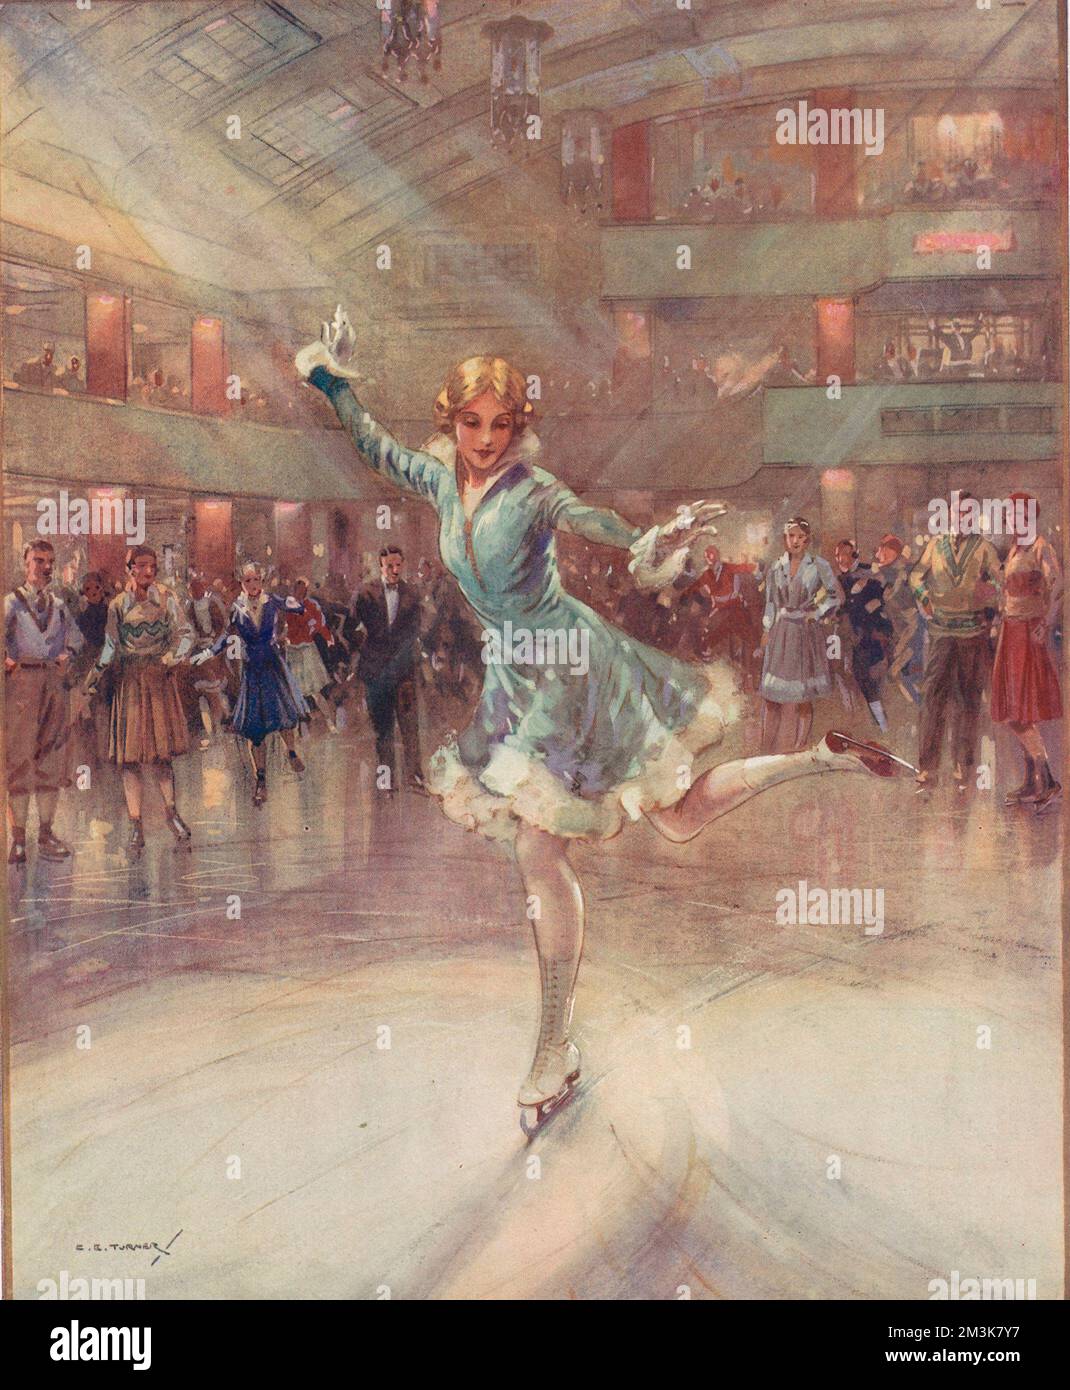 Colour illustration by C.E. Turner depicting the scene inside an ice rink in the 1930s.     Date: 11th November 1931 Stock Photo